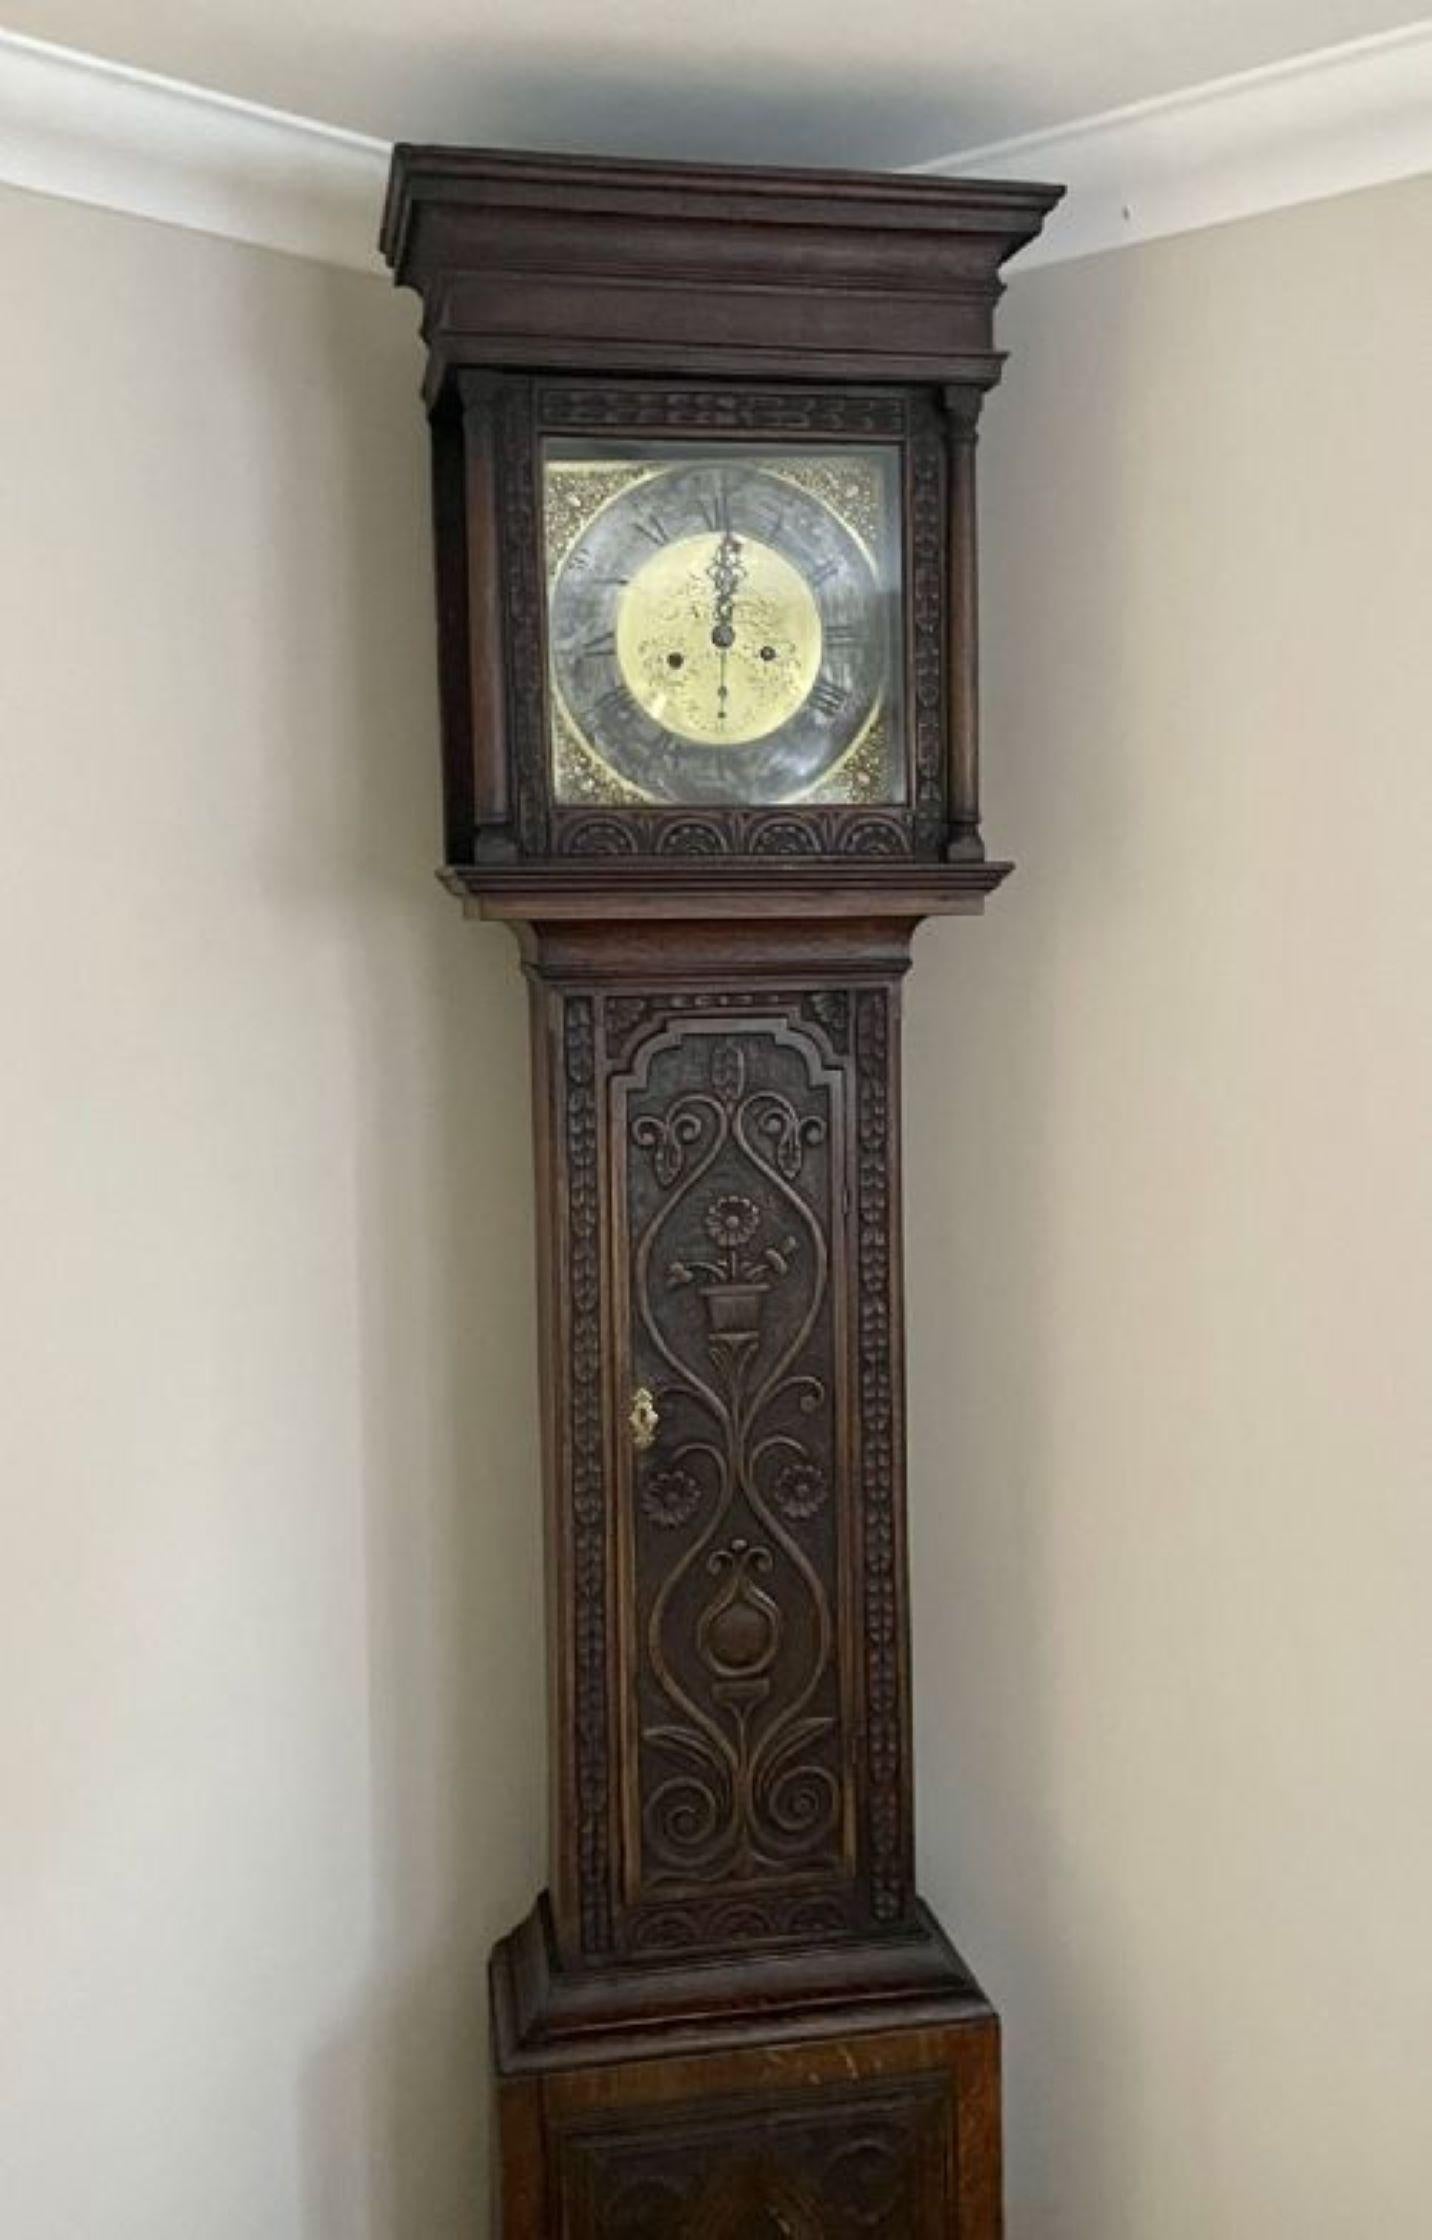 Quality Antique George III Carved Oak Brass Face Longcase Clock. Having a square brass dial with original hands with an 8 day movement striking the hour & a half bell, shaped cornice above the glass door flanked by turned columns above a long carved